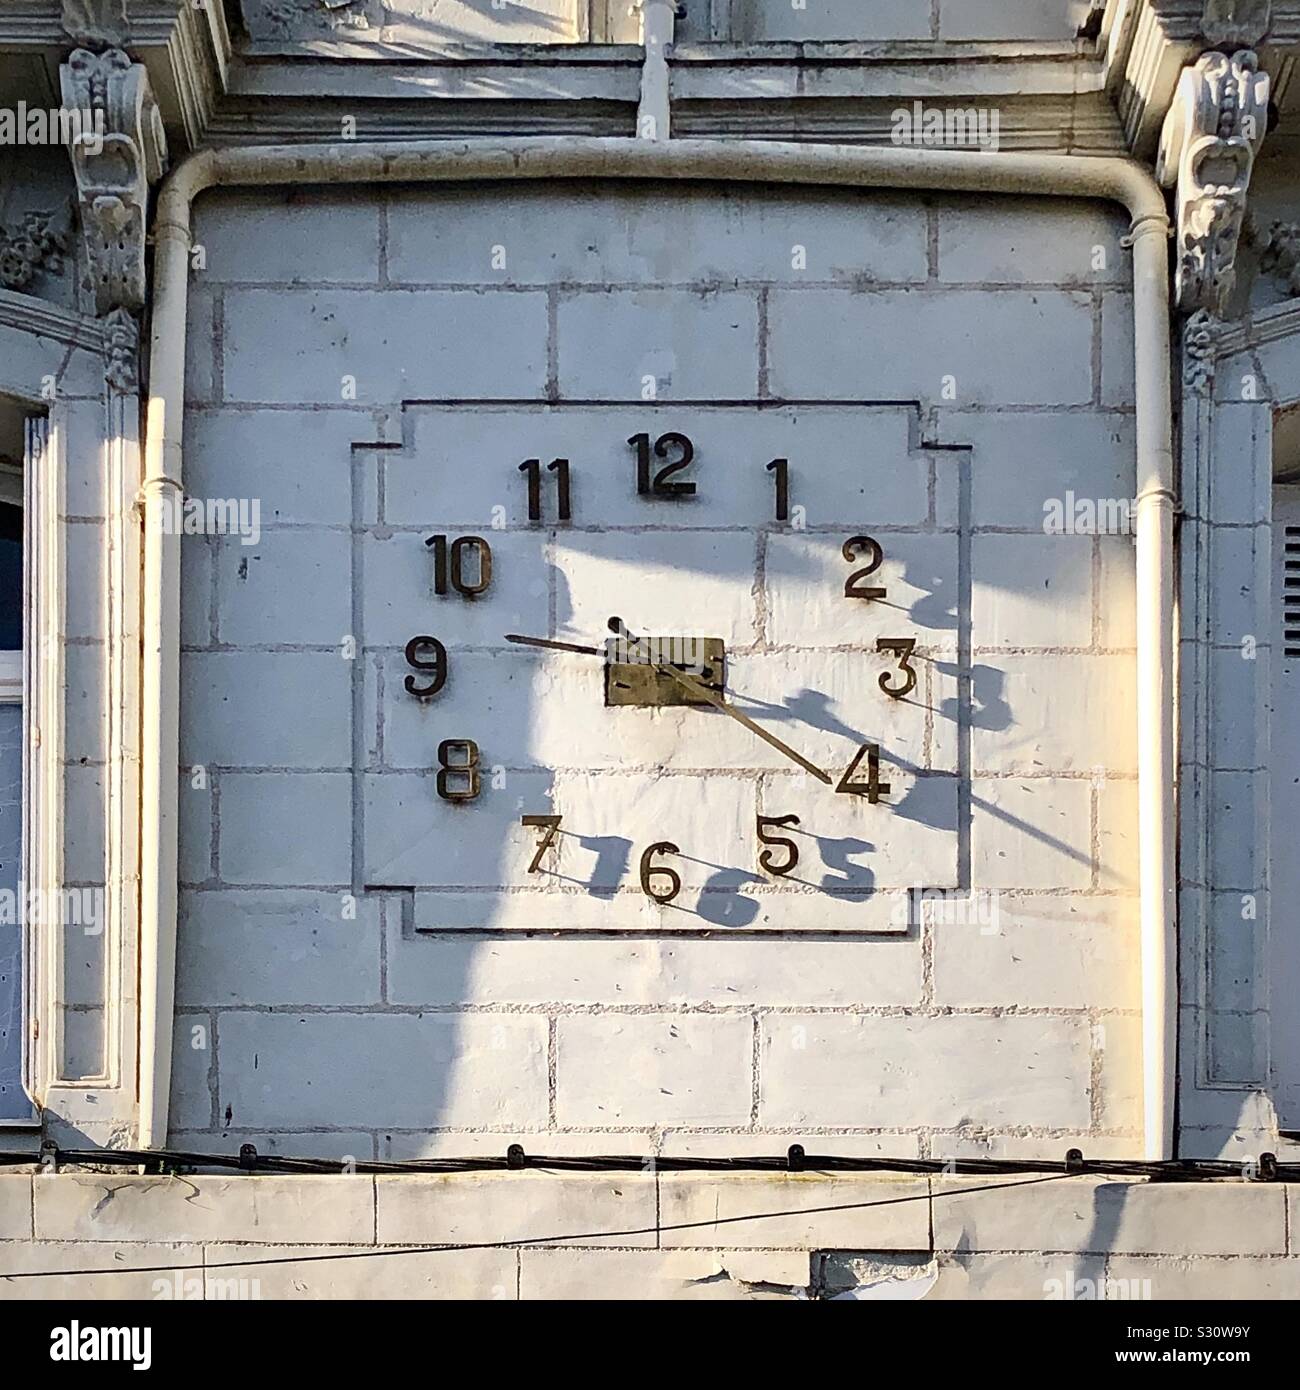 Old clock with shadows of numerals on stone building, Chatellerault, Vienne, France. Stock Photo